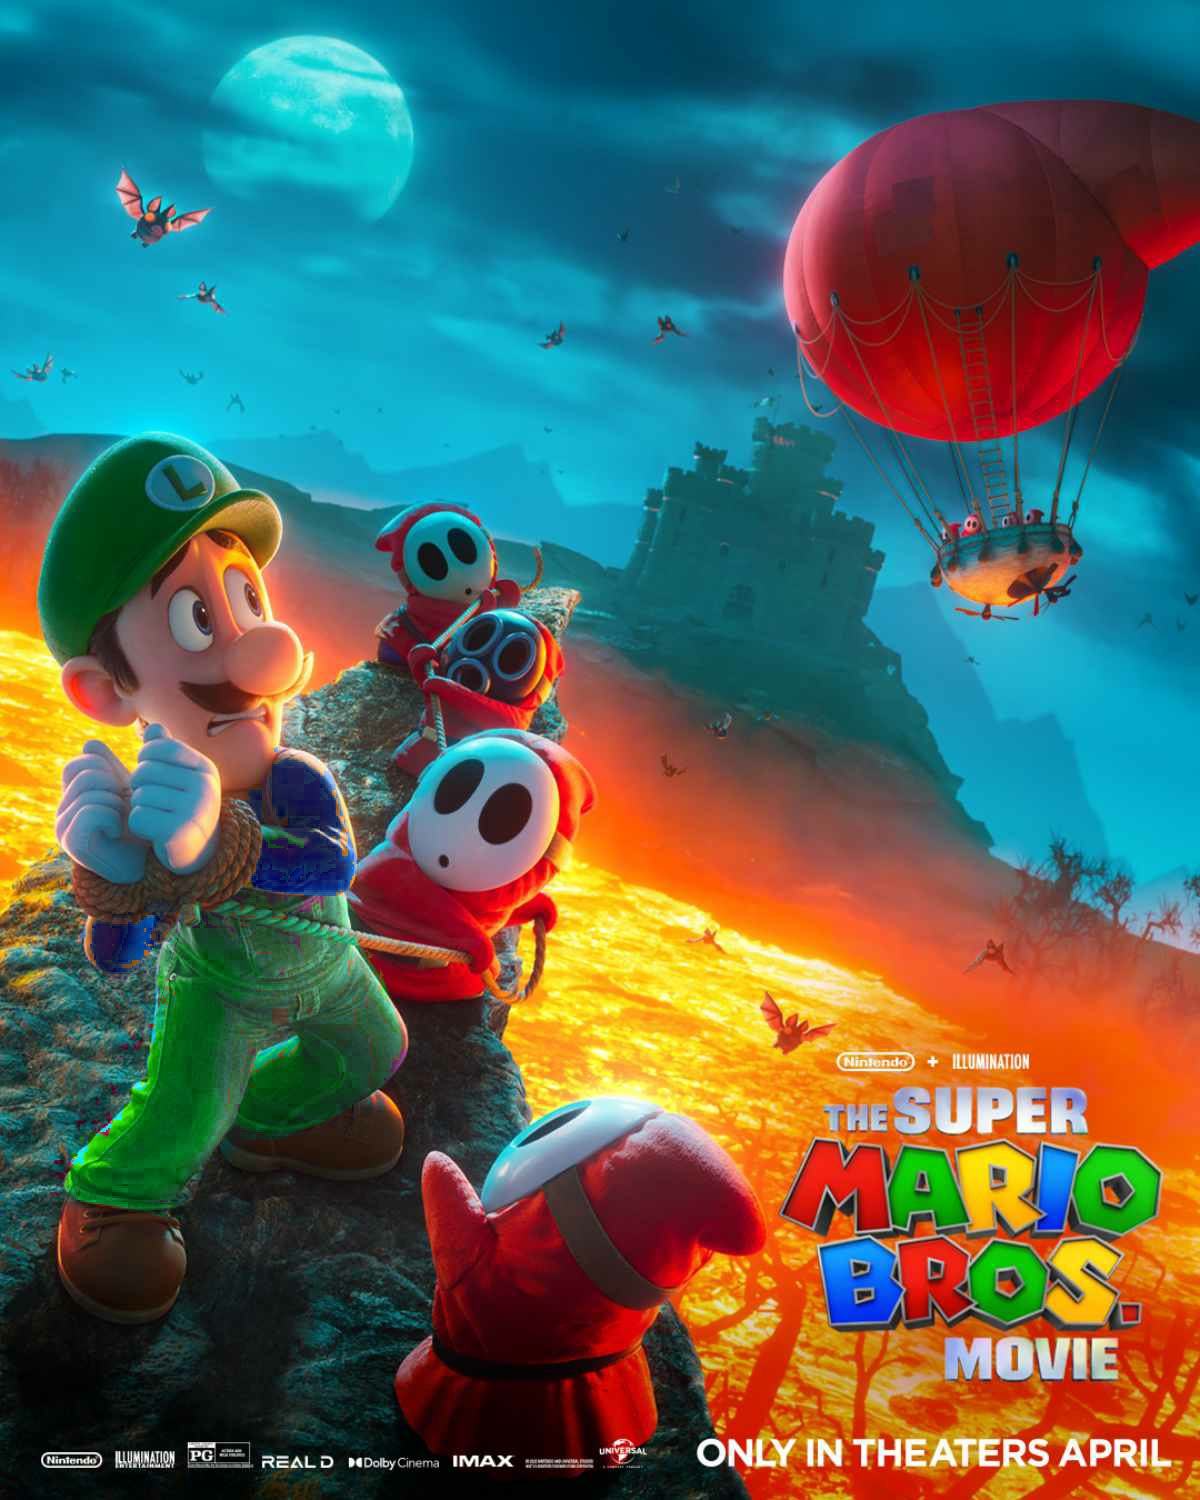 Concept art for the Super Mario Bros Movie 1 by angry9guy on DeviantArt